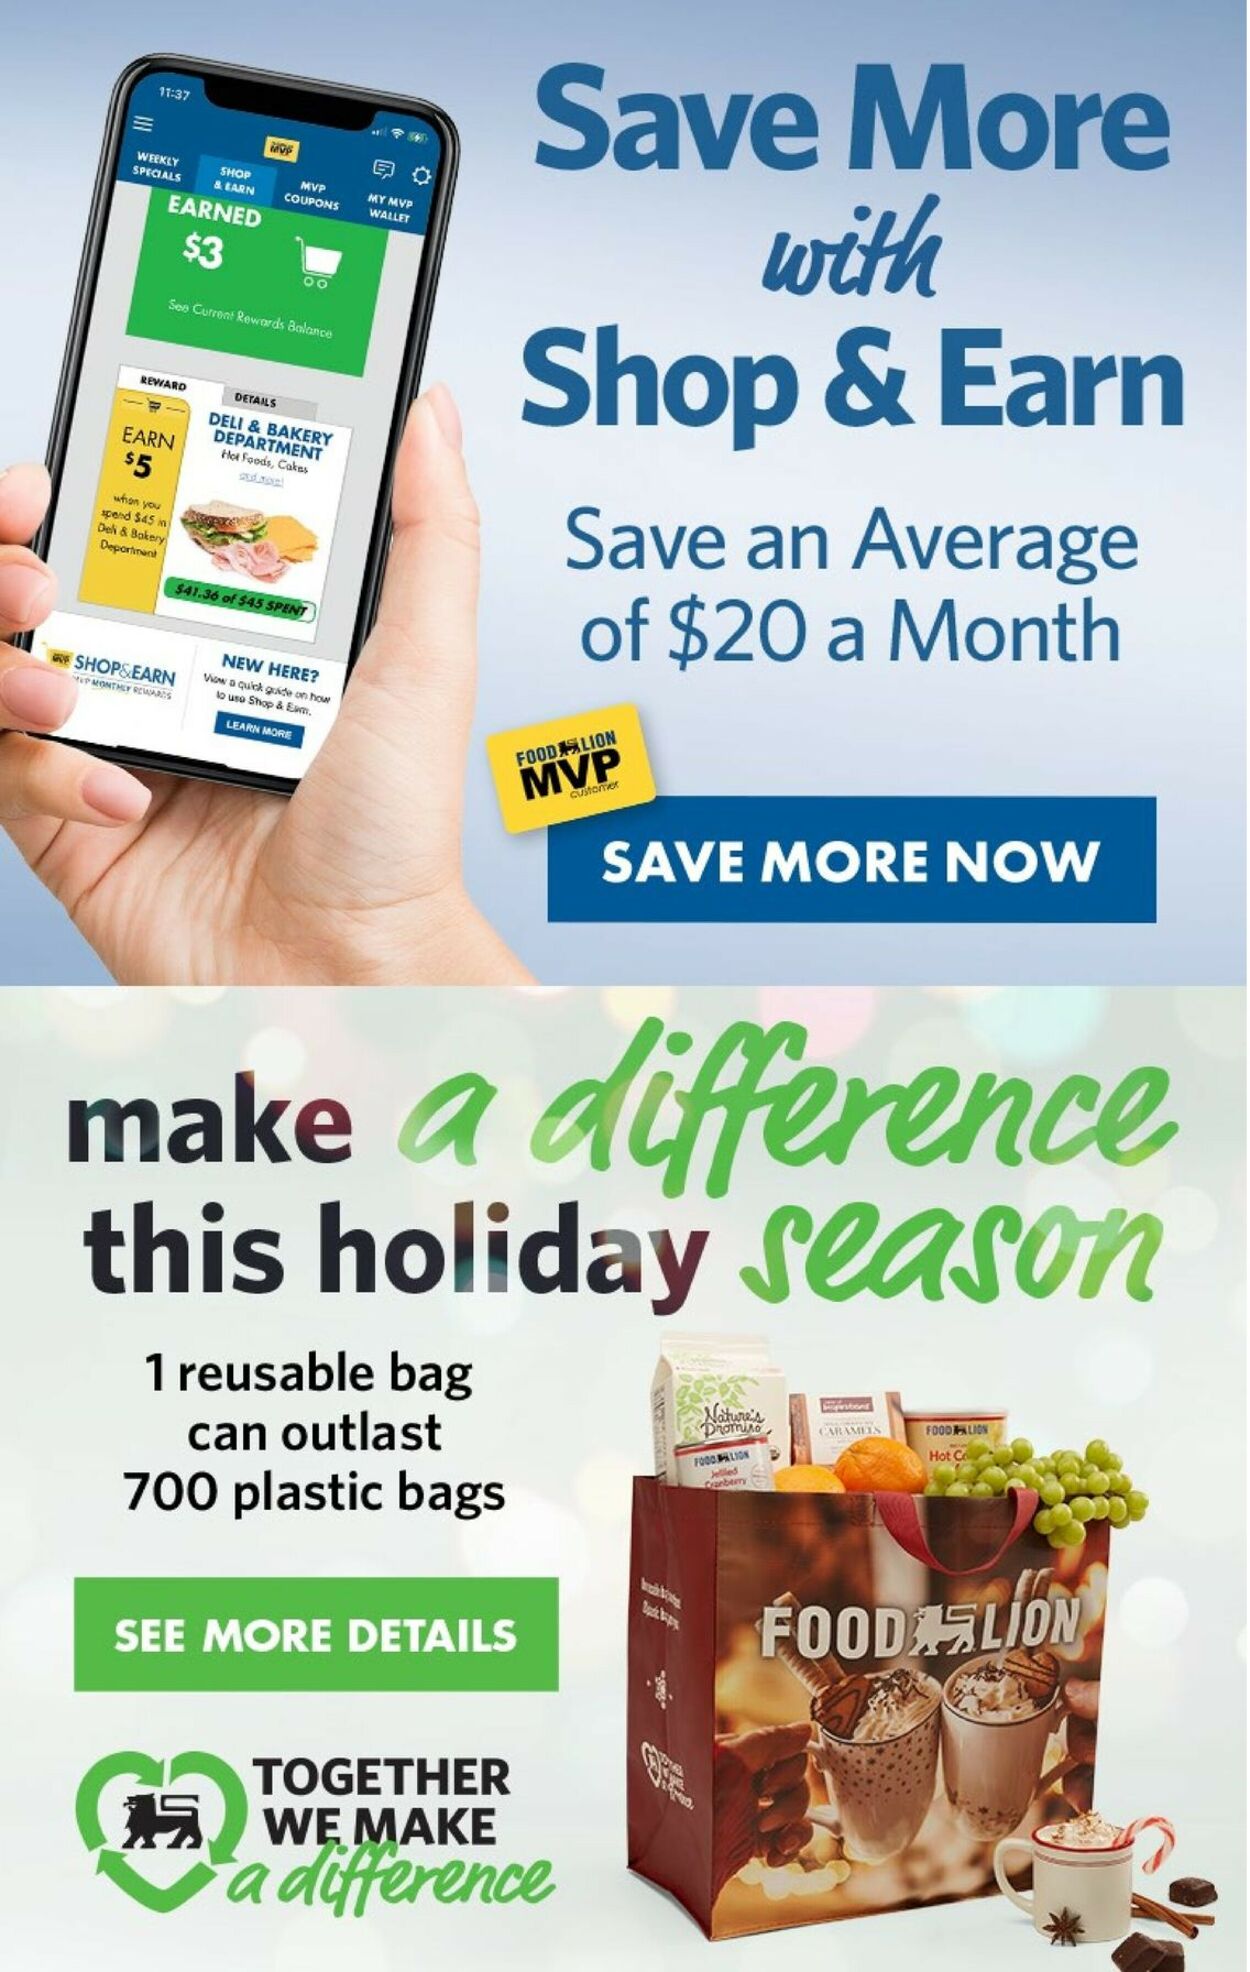 Food Lion Ad from 12/14/2022